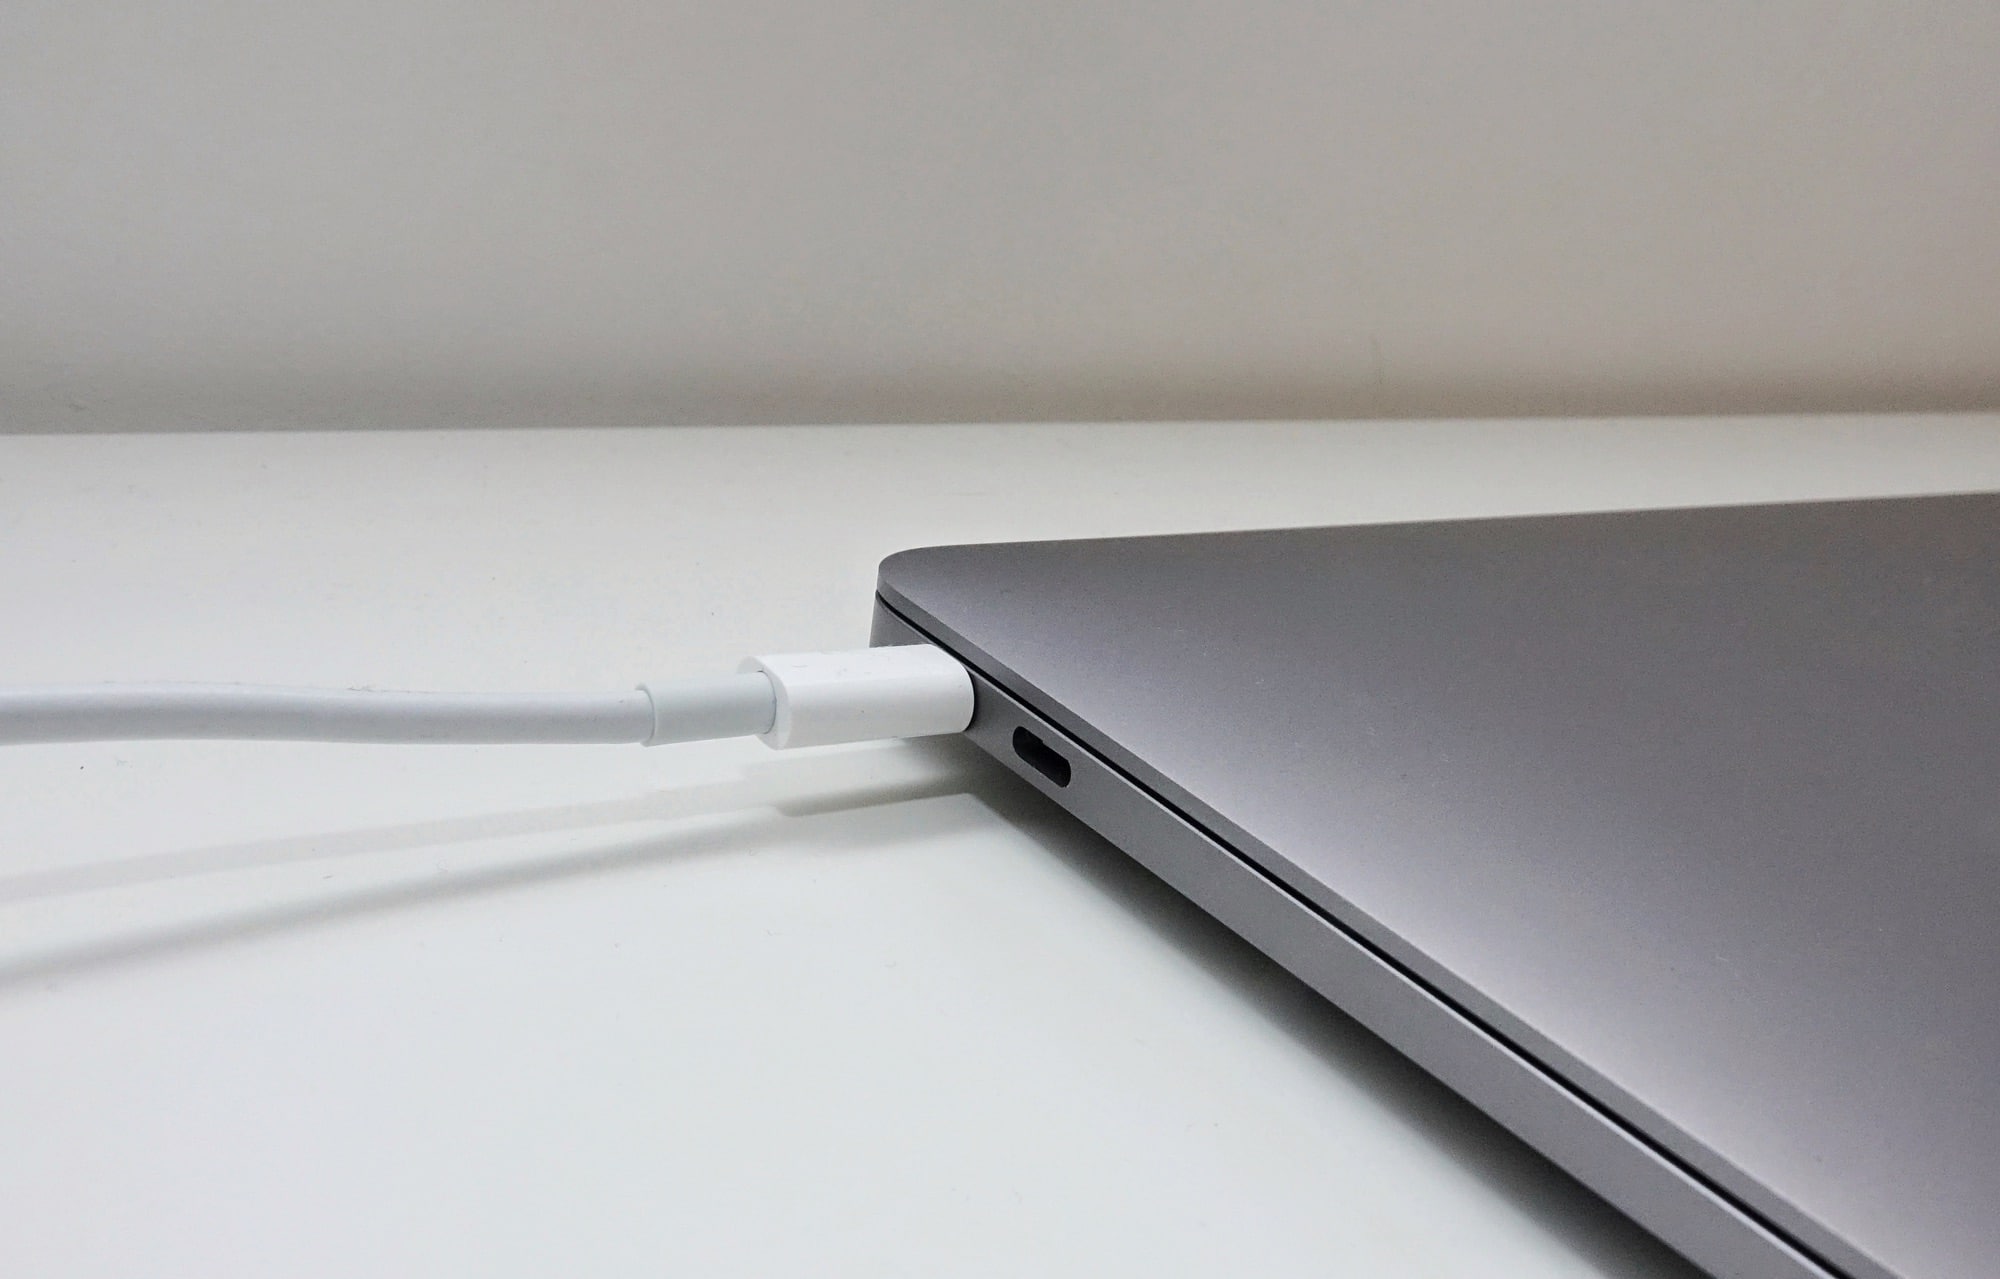 The Type C ports on the late-2020 MacBook Air